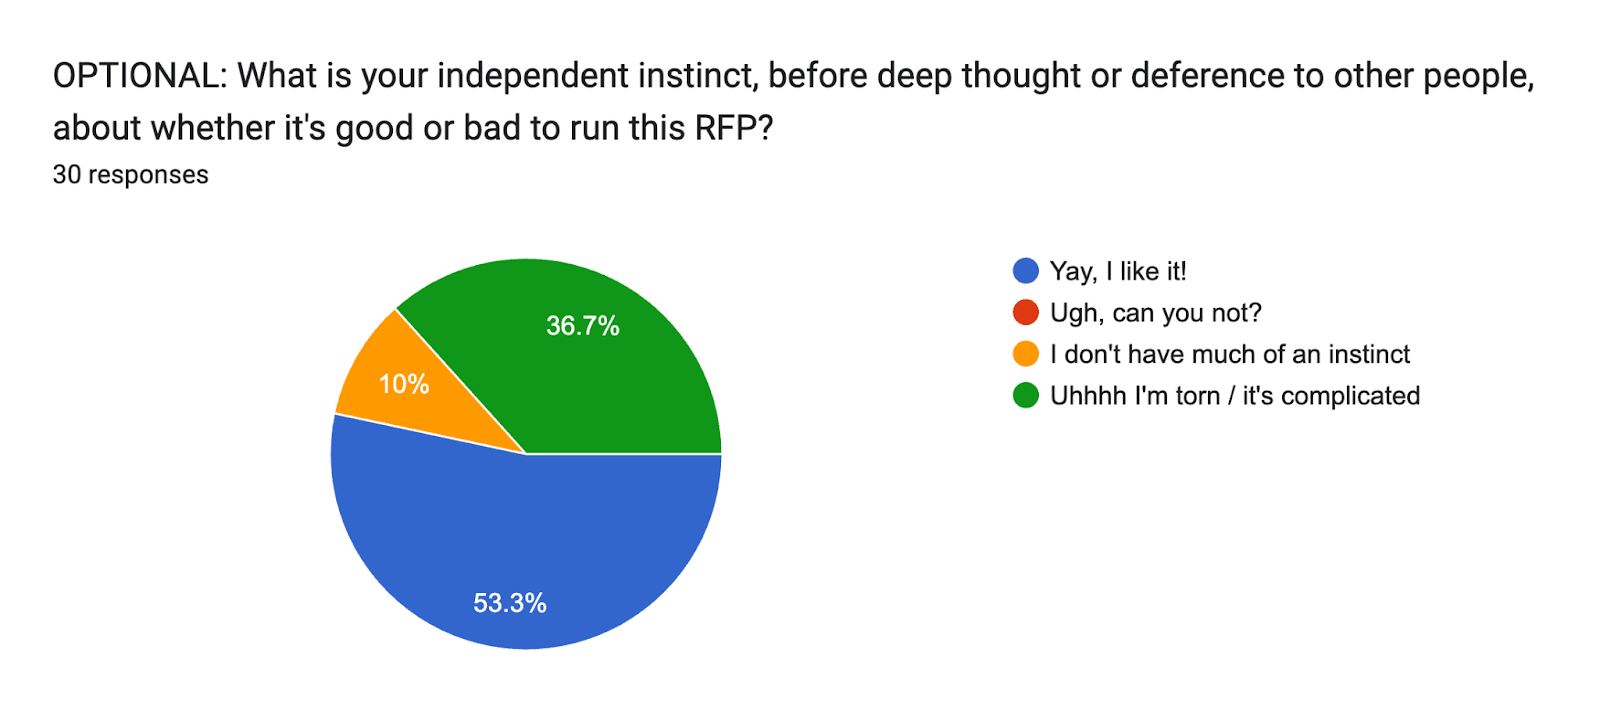 Forms response chart. Question title: OPTIONAL: What is your independent instinct, before deep thought or deference to other people, about whether it